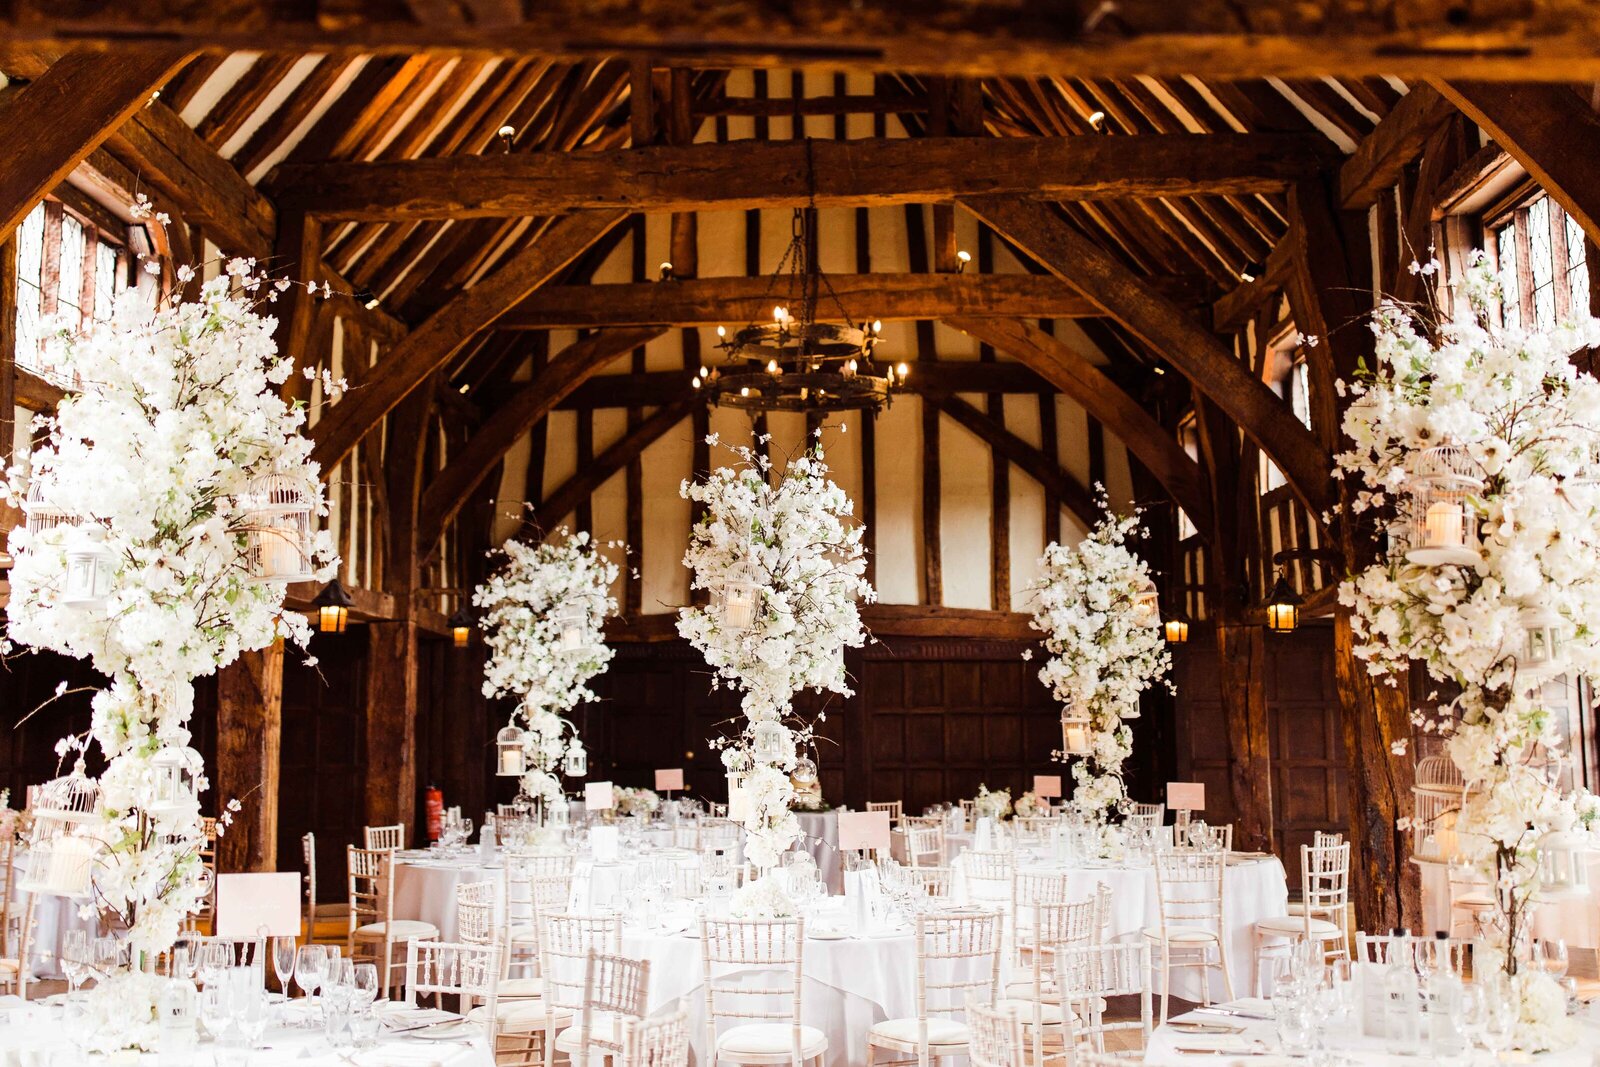 Tall, glamorous white floral centrepieces decorating a rustic barn wedding reception venue in Hampshire.